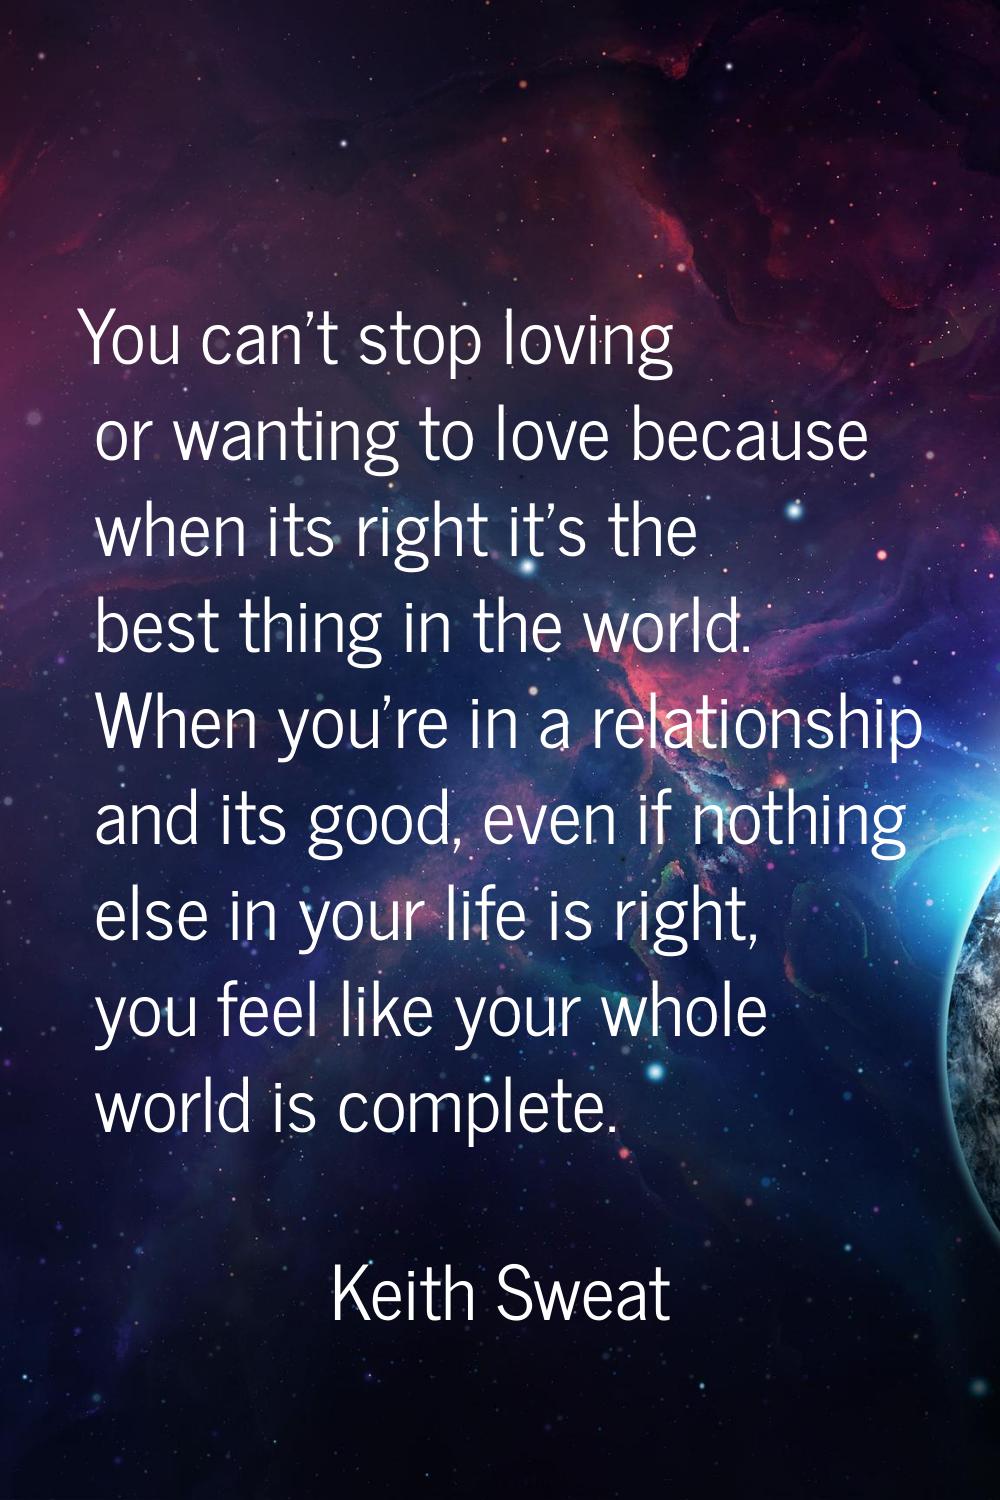 You can't stop loving or wanting to love because when its right it's the best thing in the world. W